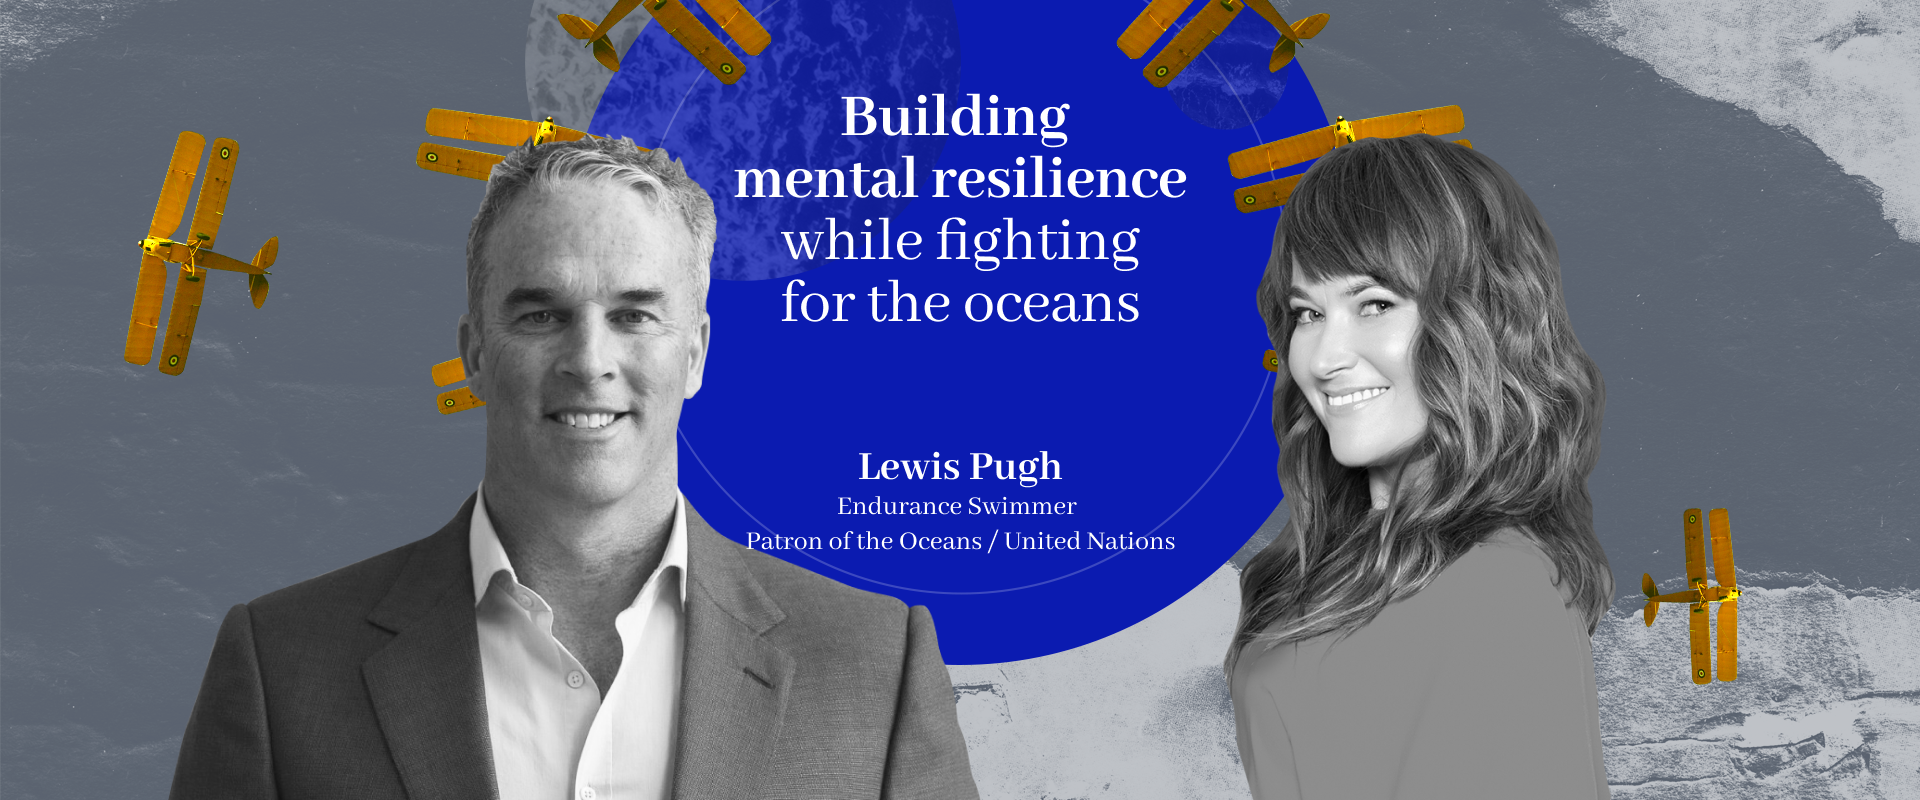 Building mental resilience while fighting for the oceans